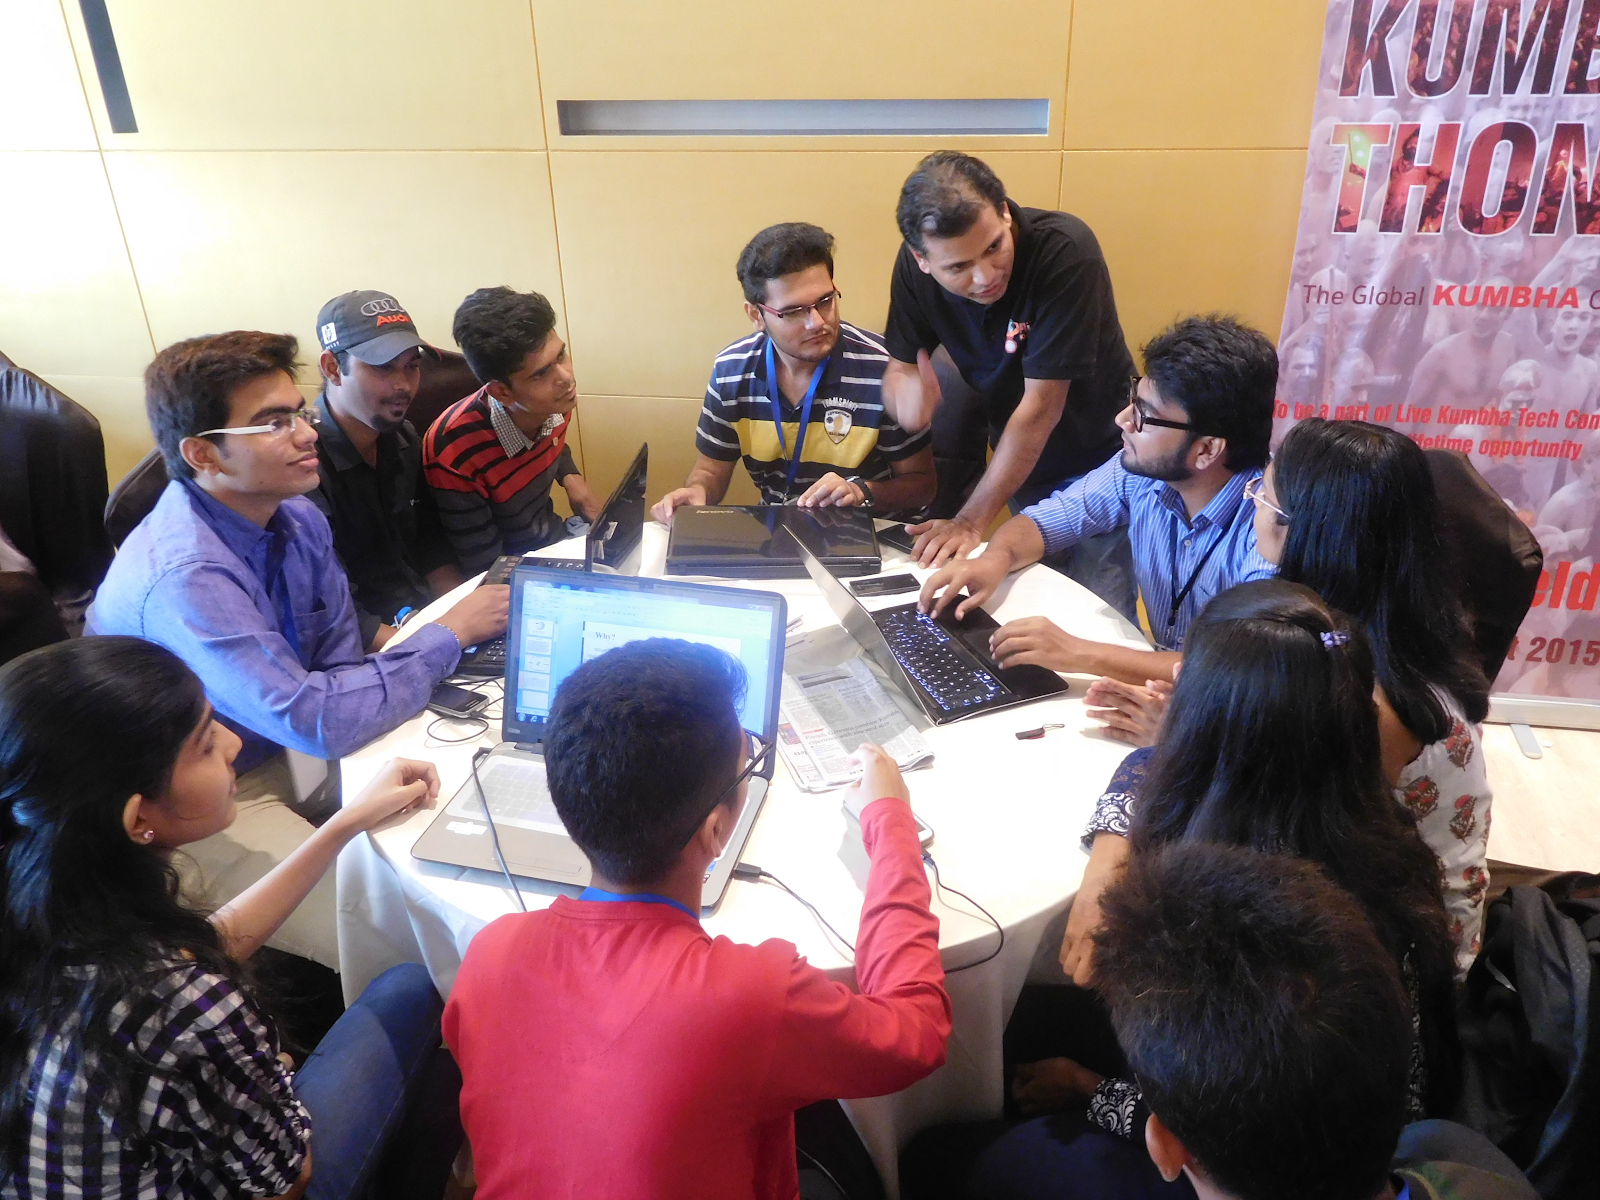 Sunil Khandbahale mentoring young innovators to solve local social challenges